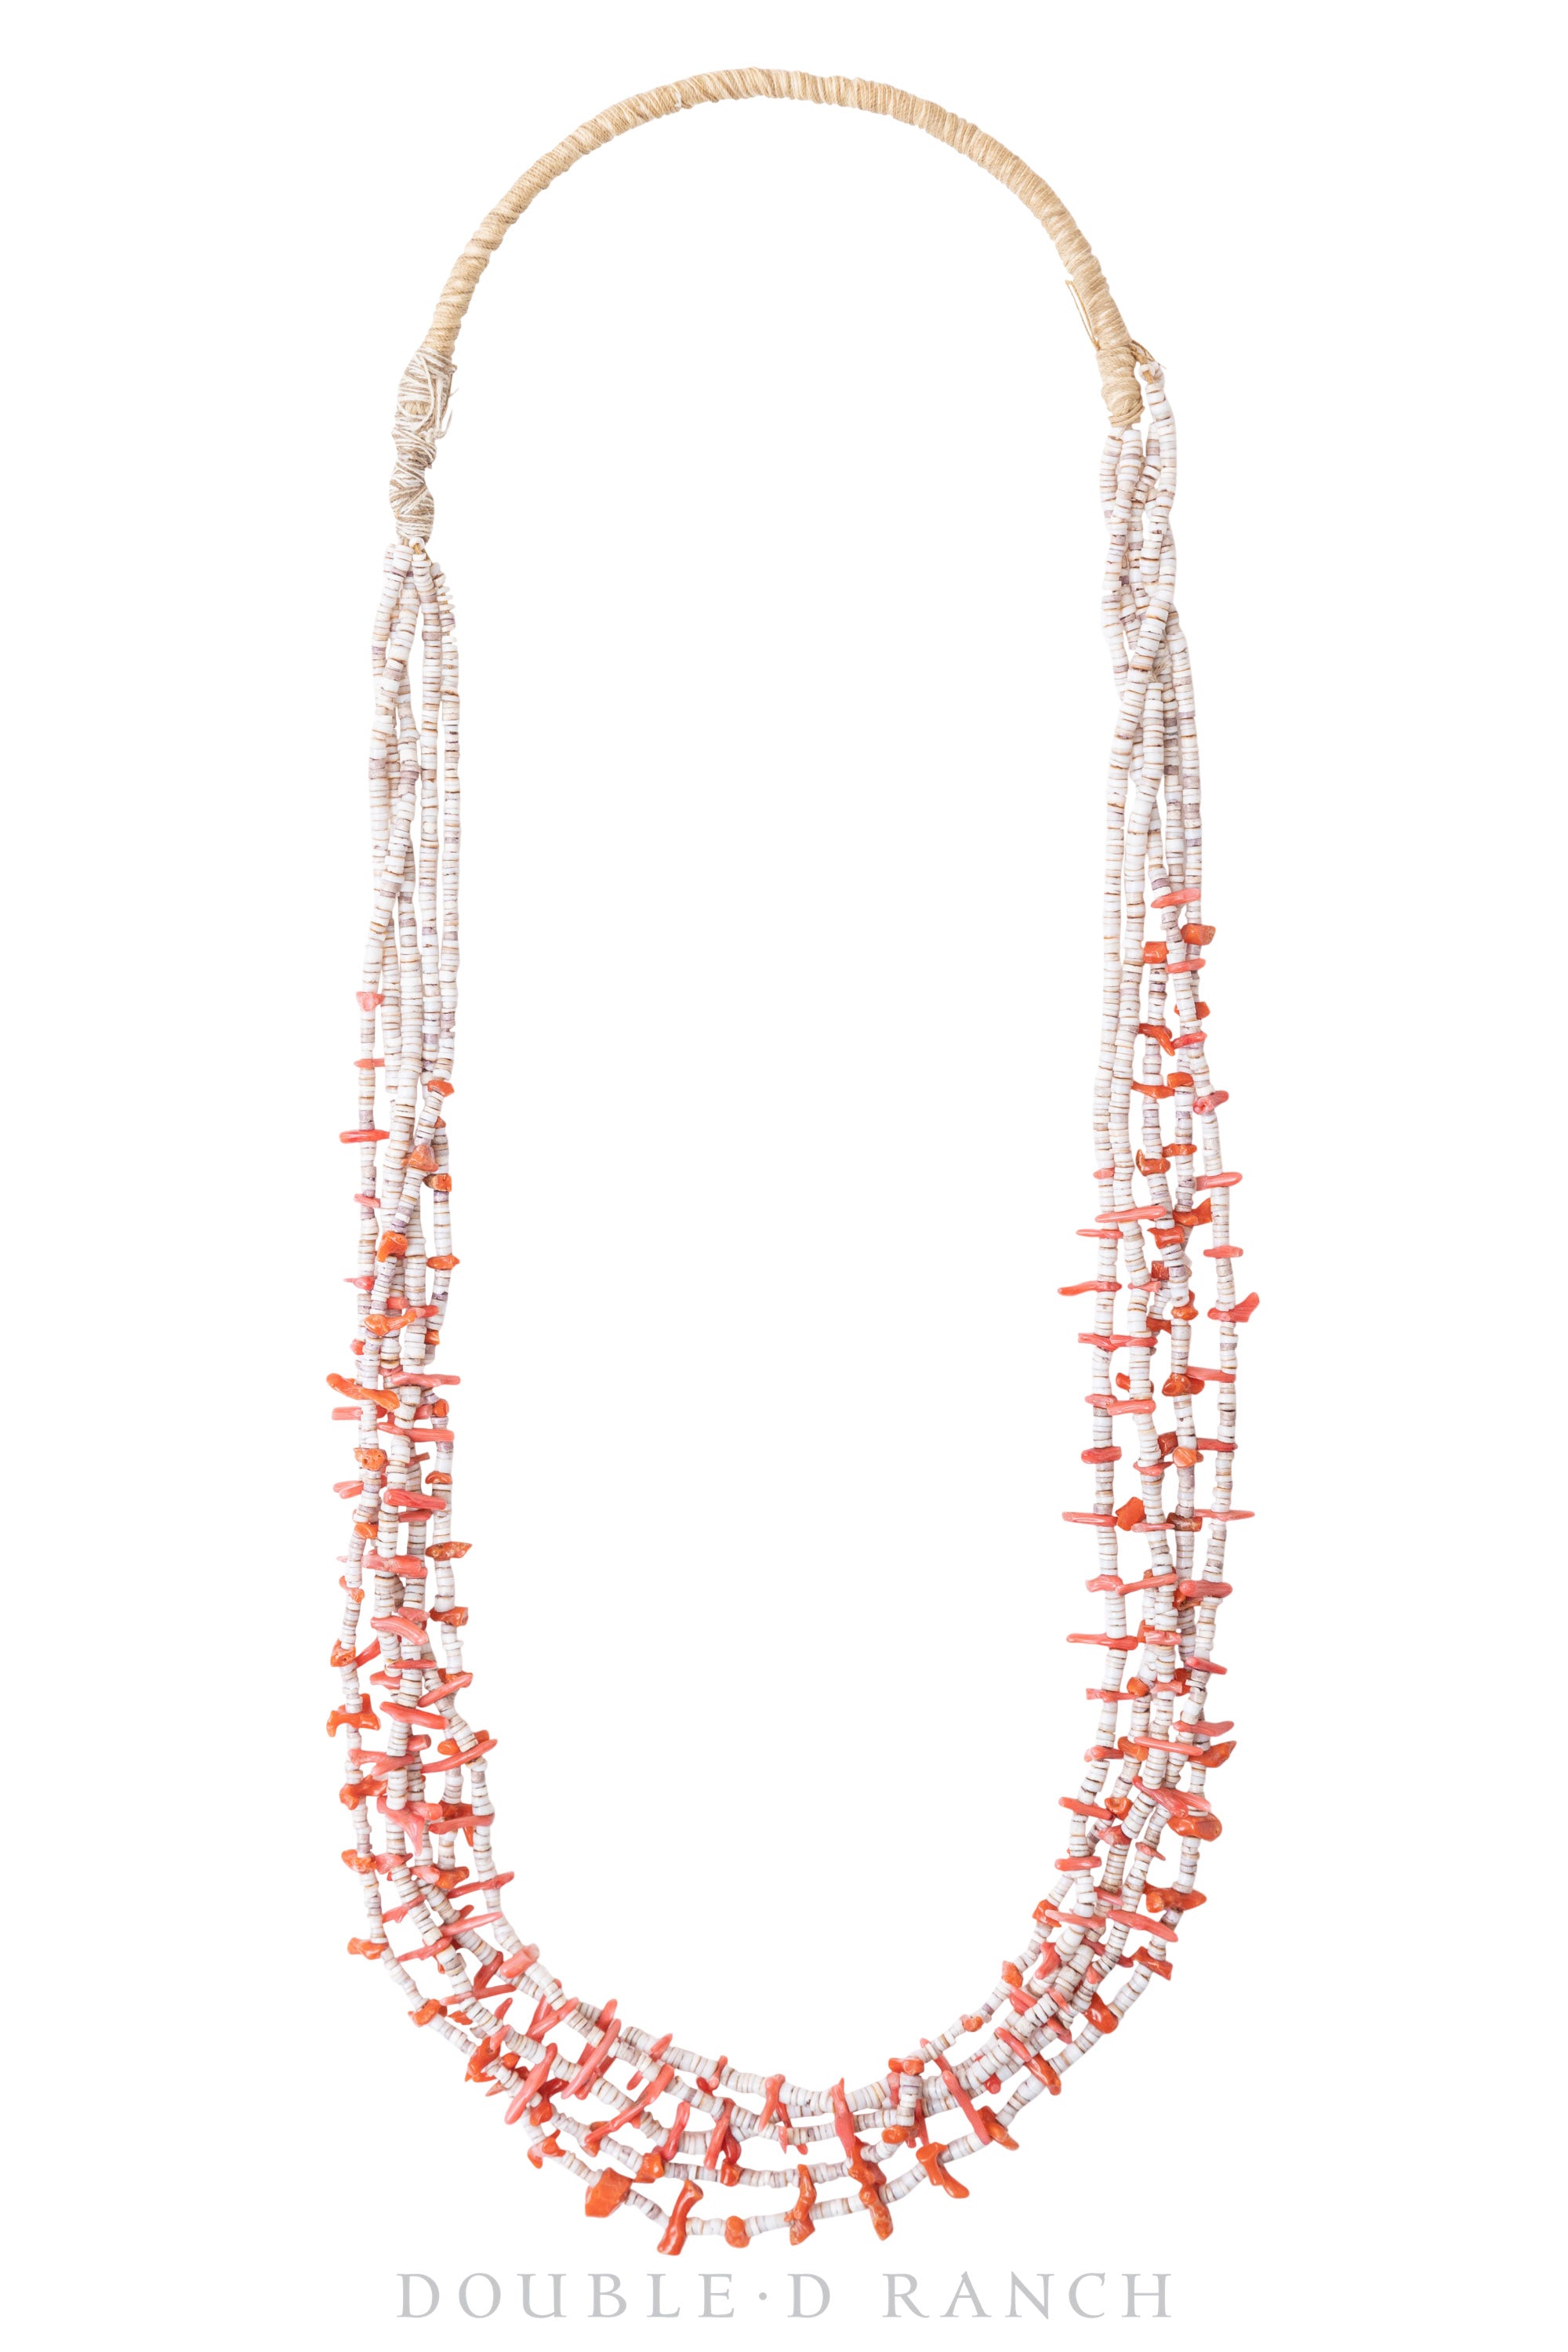 Necklace, Natural Stone, Heishi, Coral Branches with Shell, Pueblo, Traditional Wrap, Vintage, 1903